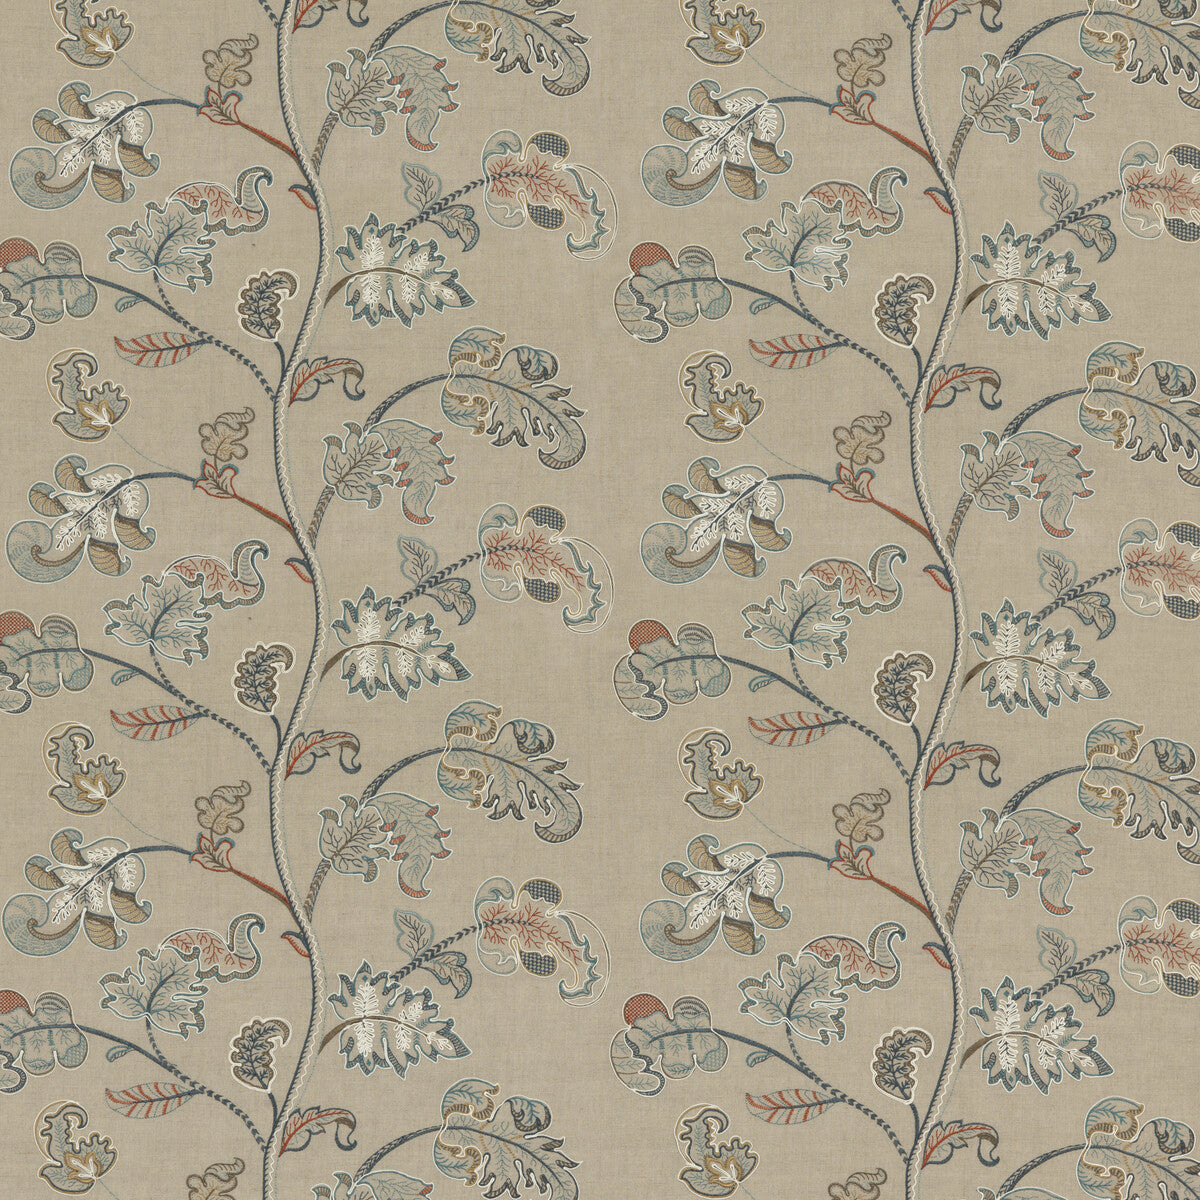 Alderwood fabric in teal color - pattern BF10769.2.0 - by G P &amp; J Baker in the Keswick Embroideries collection